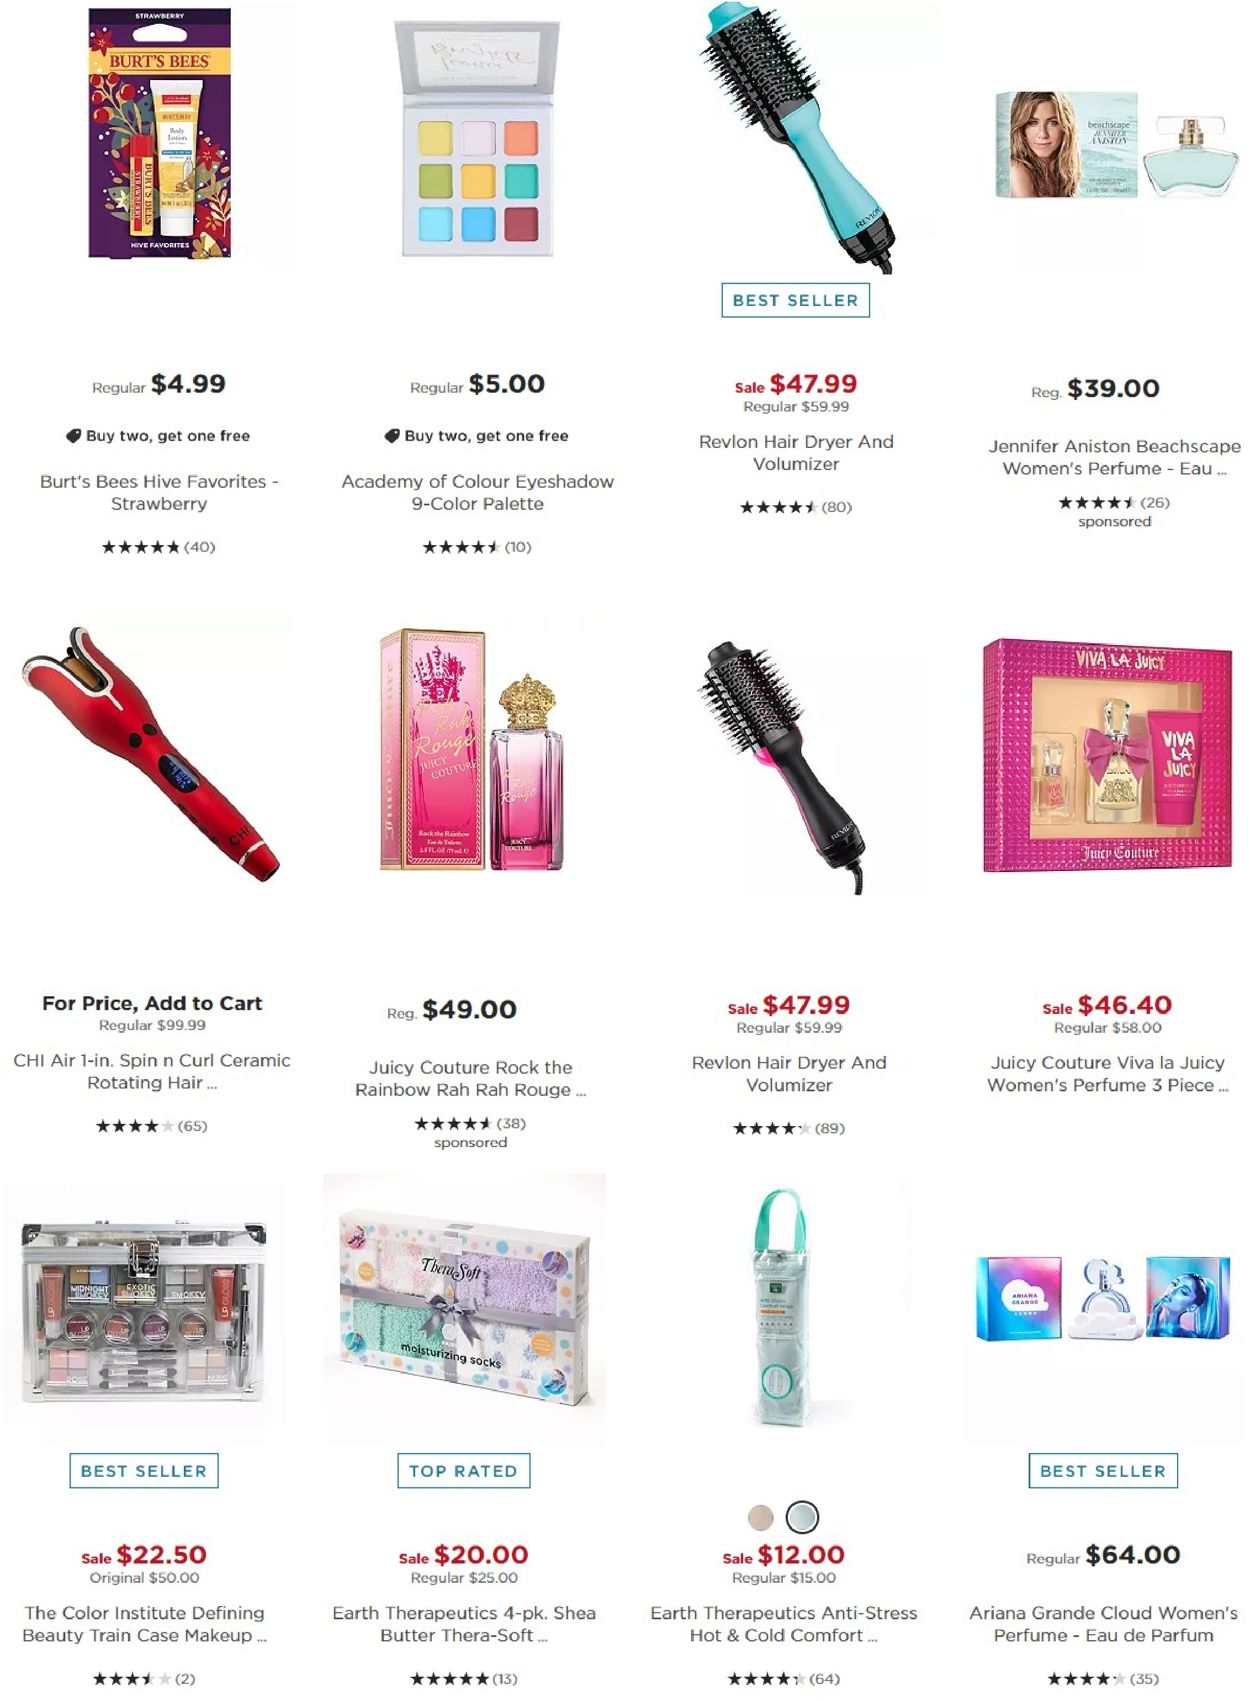 Catalogue Kohl's Christmas Gifts 2020 from 12/21/2020